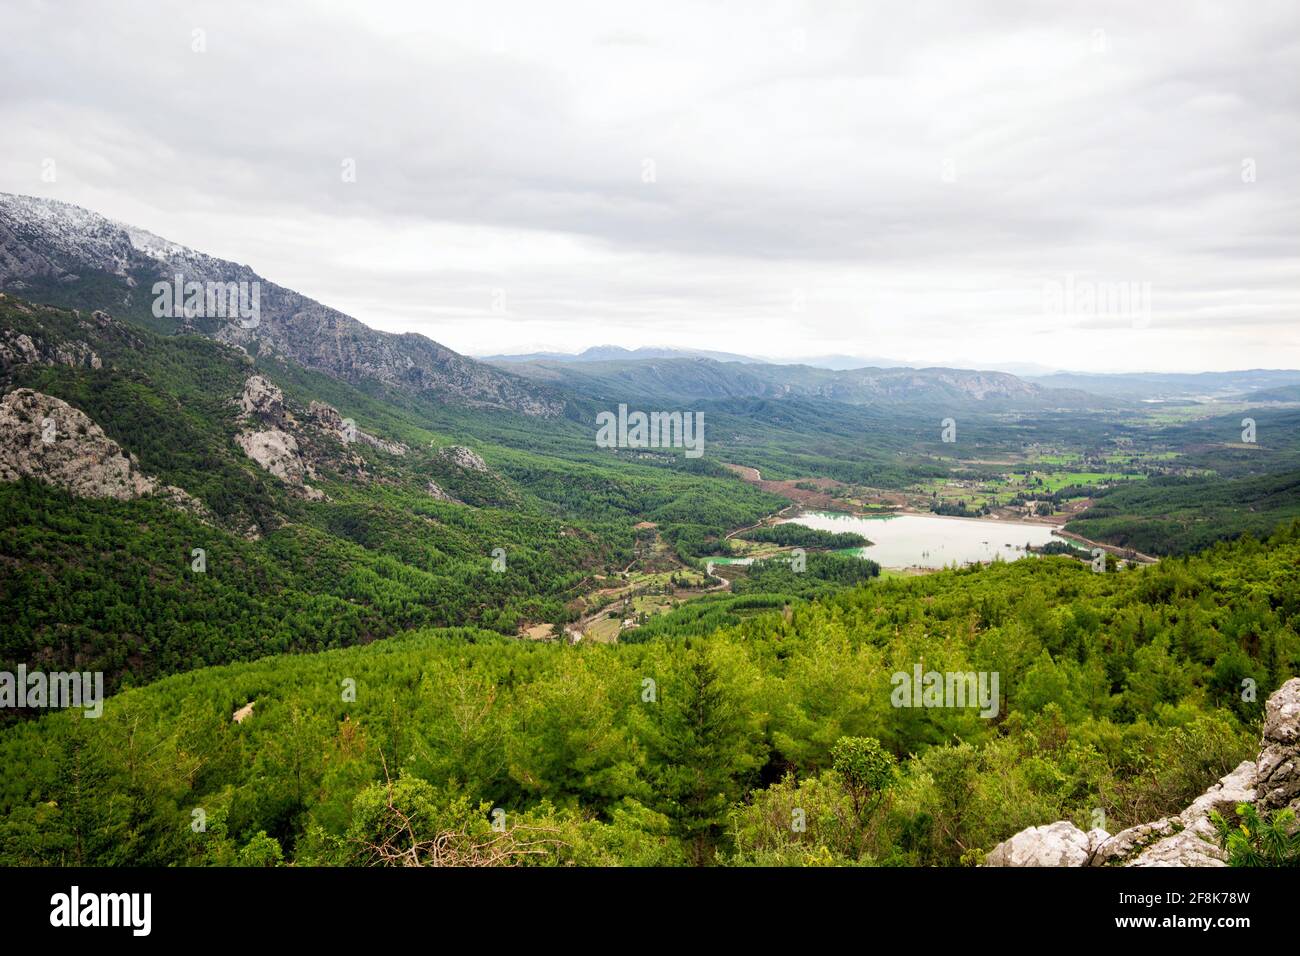 View over a valley in the Taurus mountains in Turkey Stock Photo